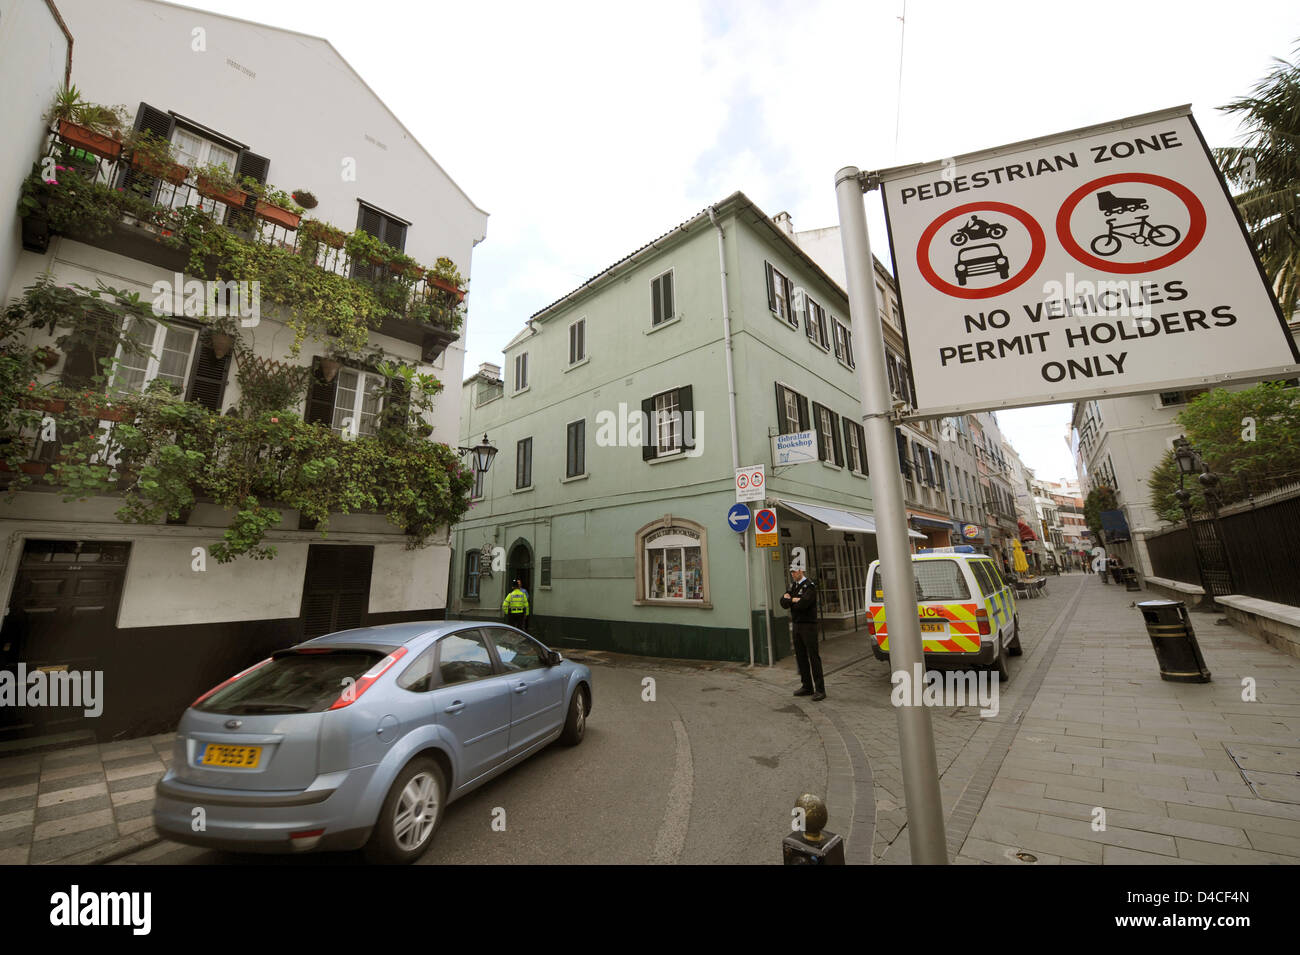 The city centre is prohibited for cars, motorbikes, roller skates and bicycles at the Main Street on Gibraltar, United Kingdom, 20 January 2008. Gibraltar is a British overseas territory located near the southernmost tip of the Iberian Peninsula sharing a border with Spain to the north. Photo: Peter Kneffel Stock Photo